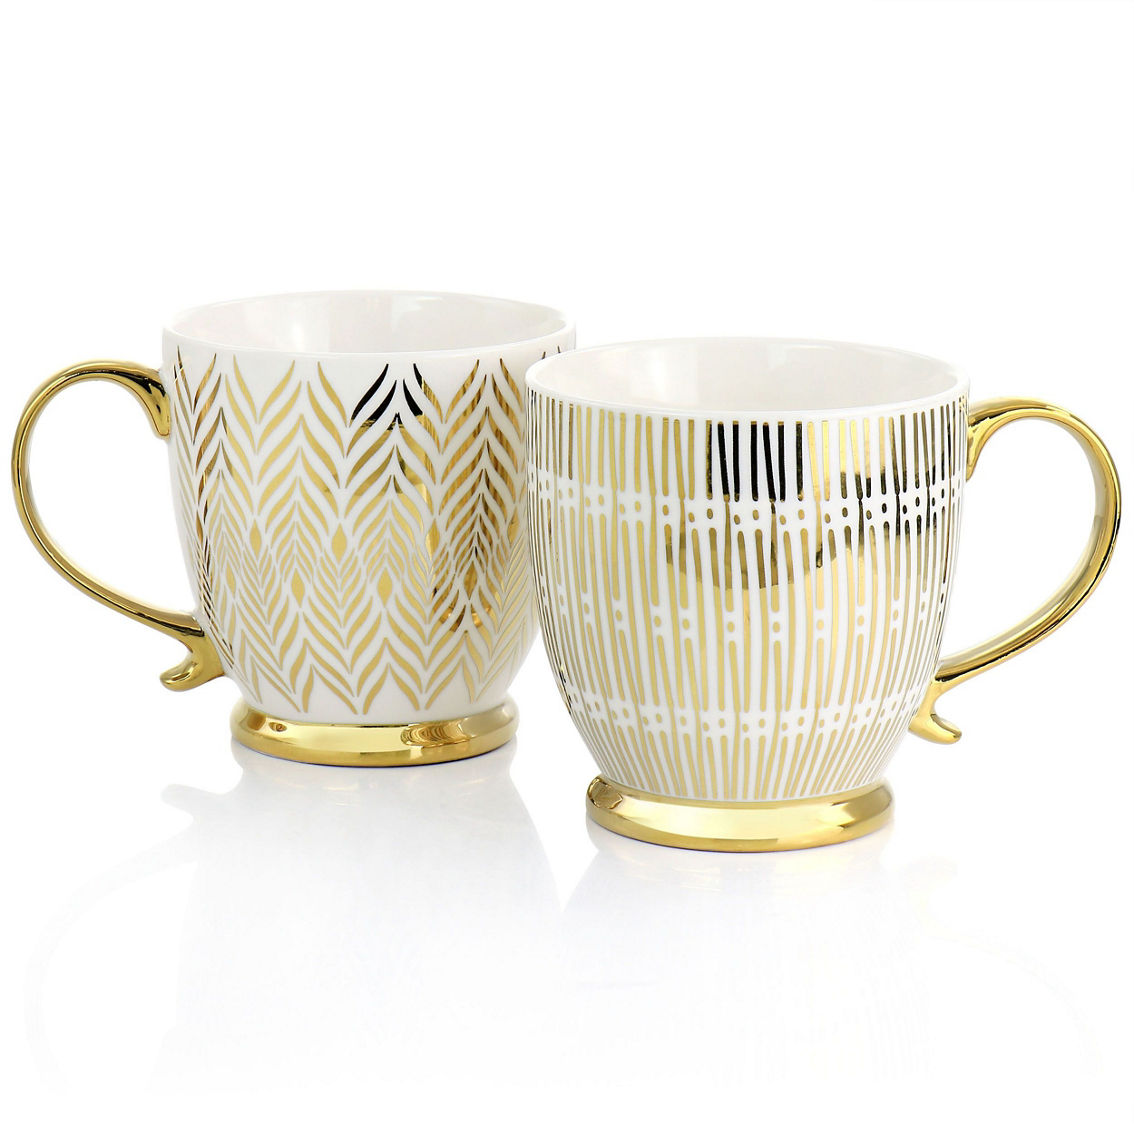 Gibson Home Gold Finch 4 Piece 16.7oz Electroplated Fine Ceramic Mug Set in Gold - Image 4 of 5